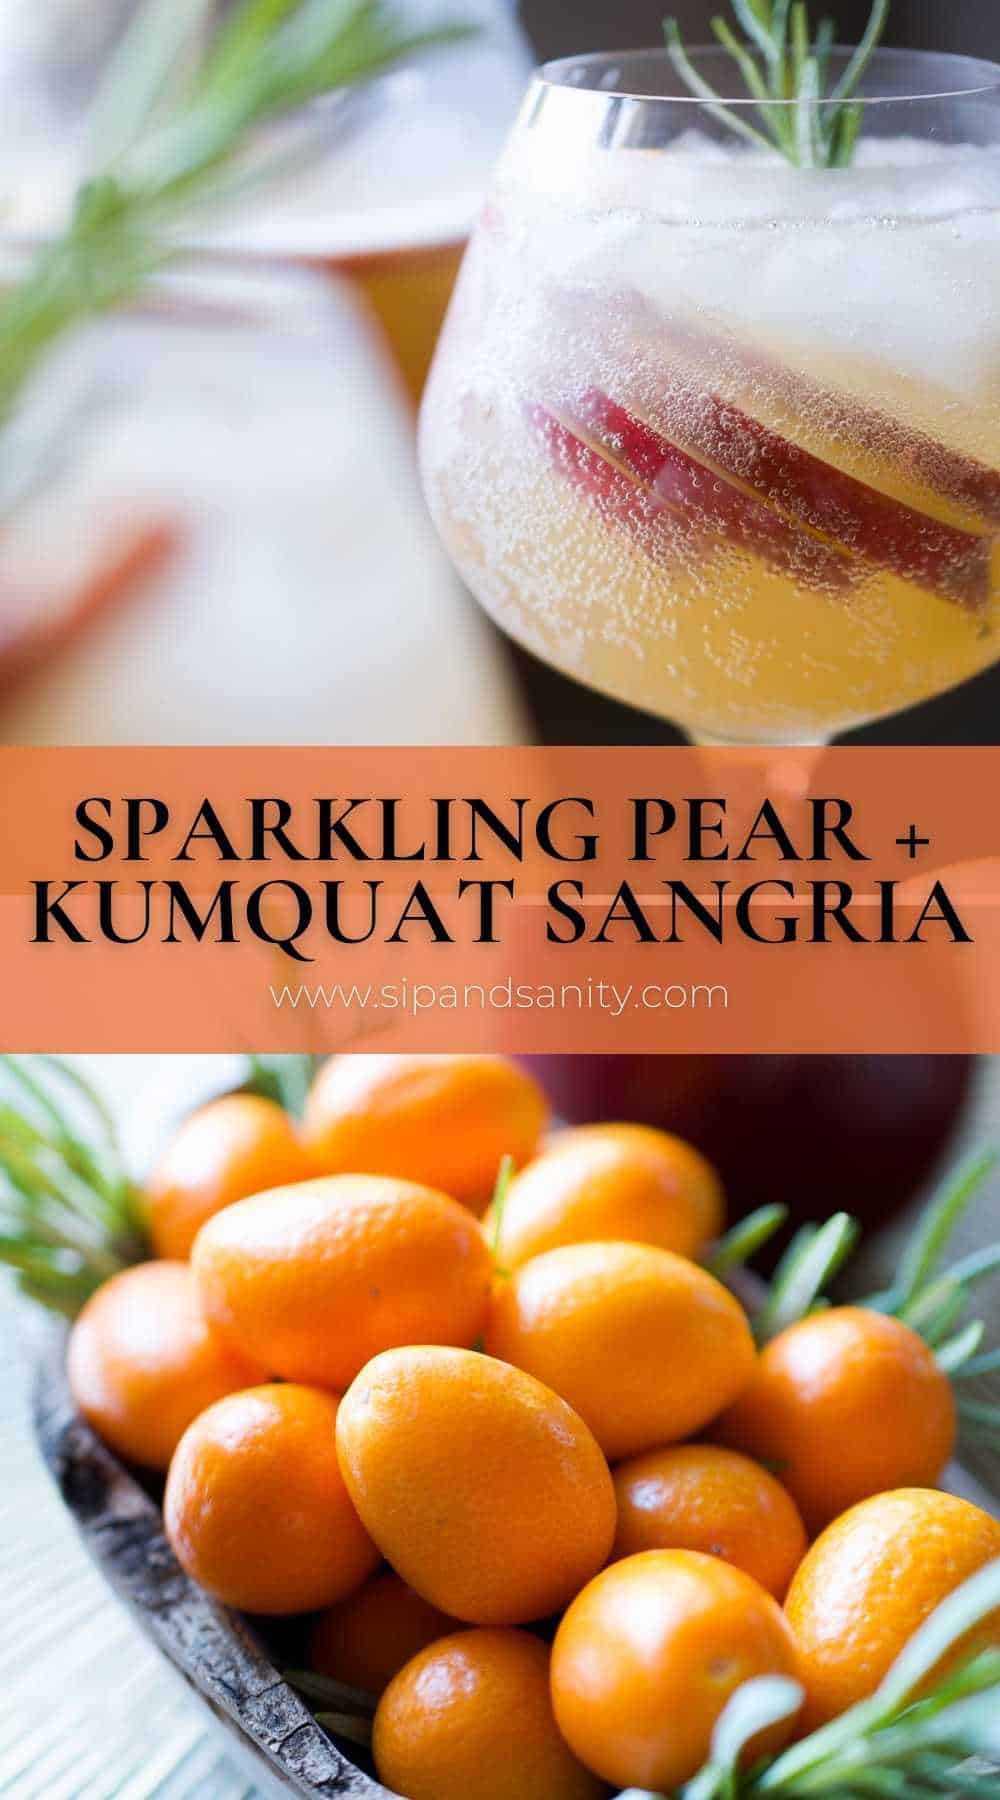 Pin image for sparkling pear and kumquat sangria.